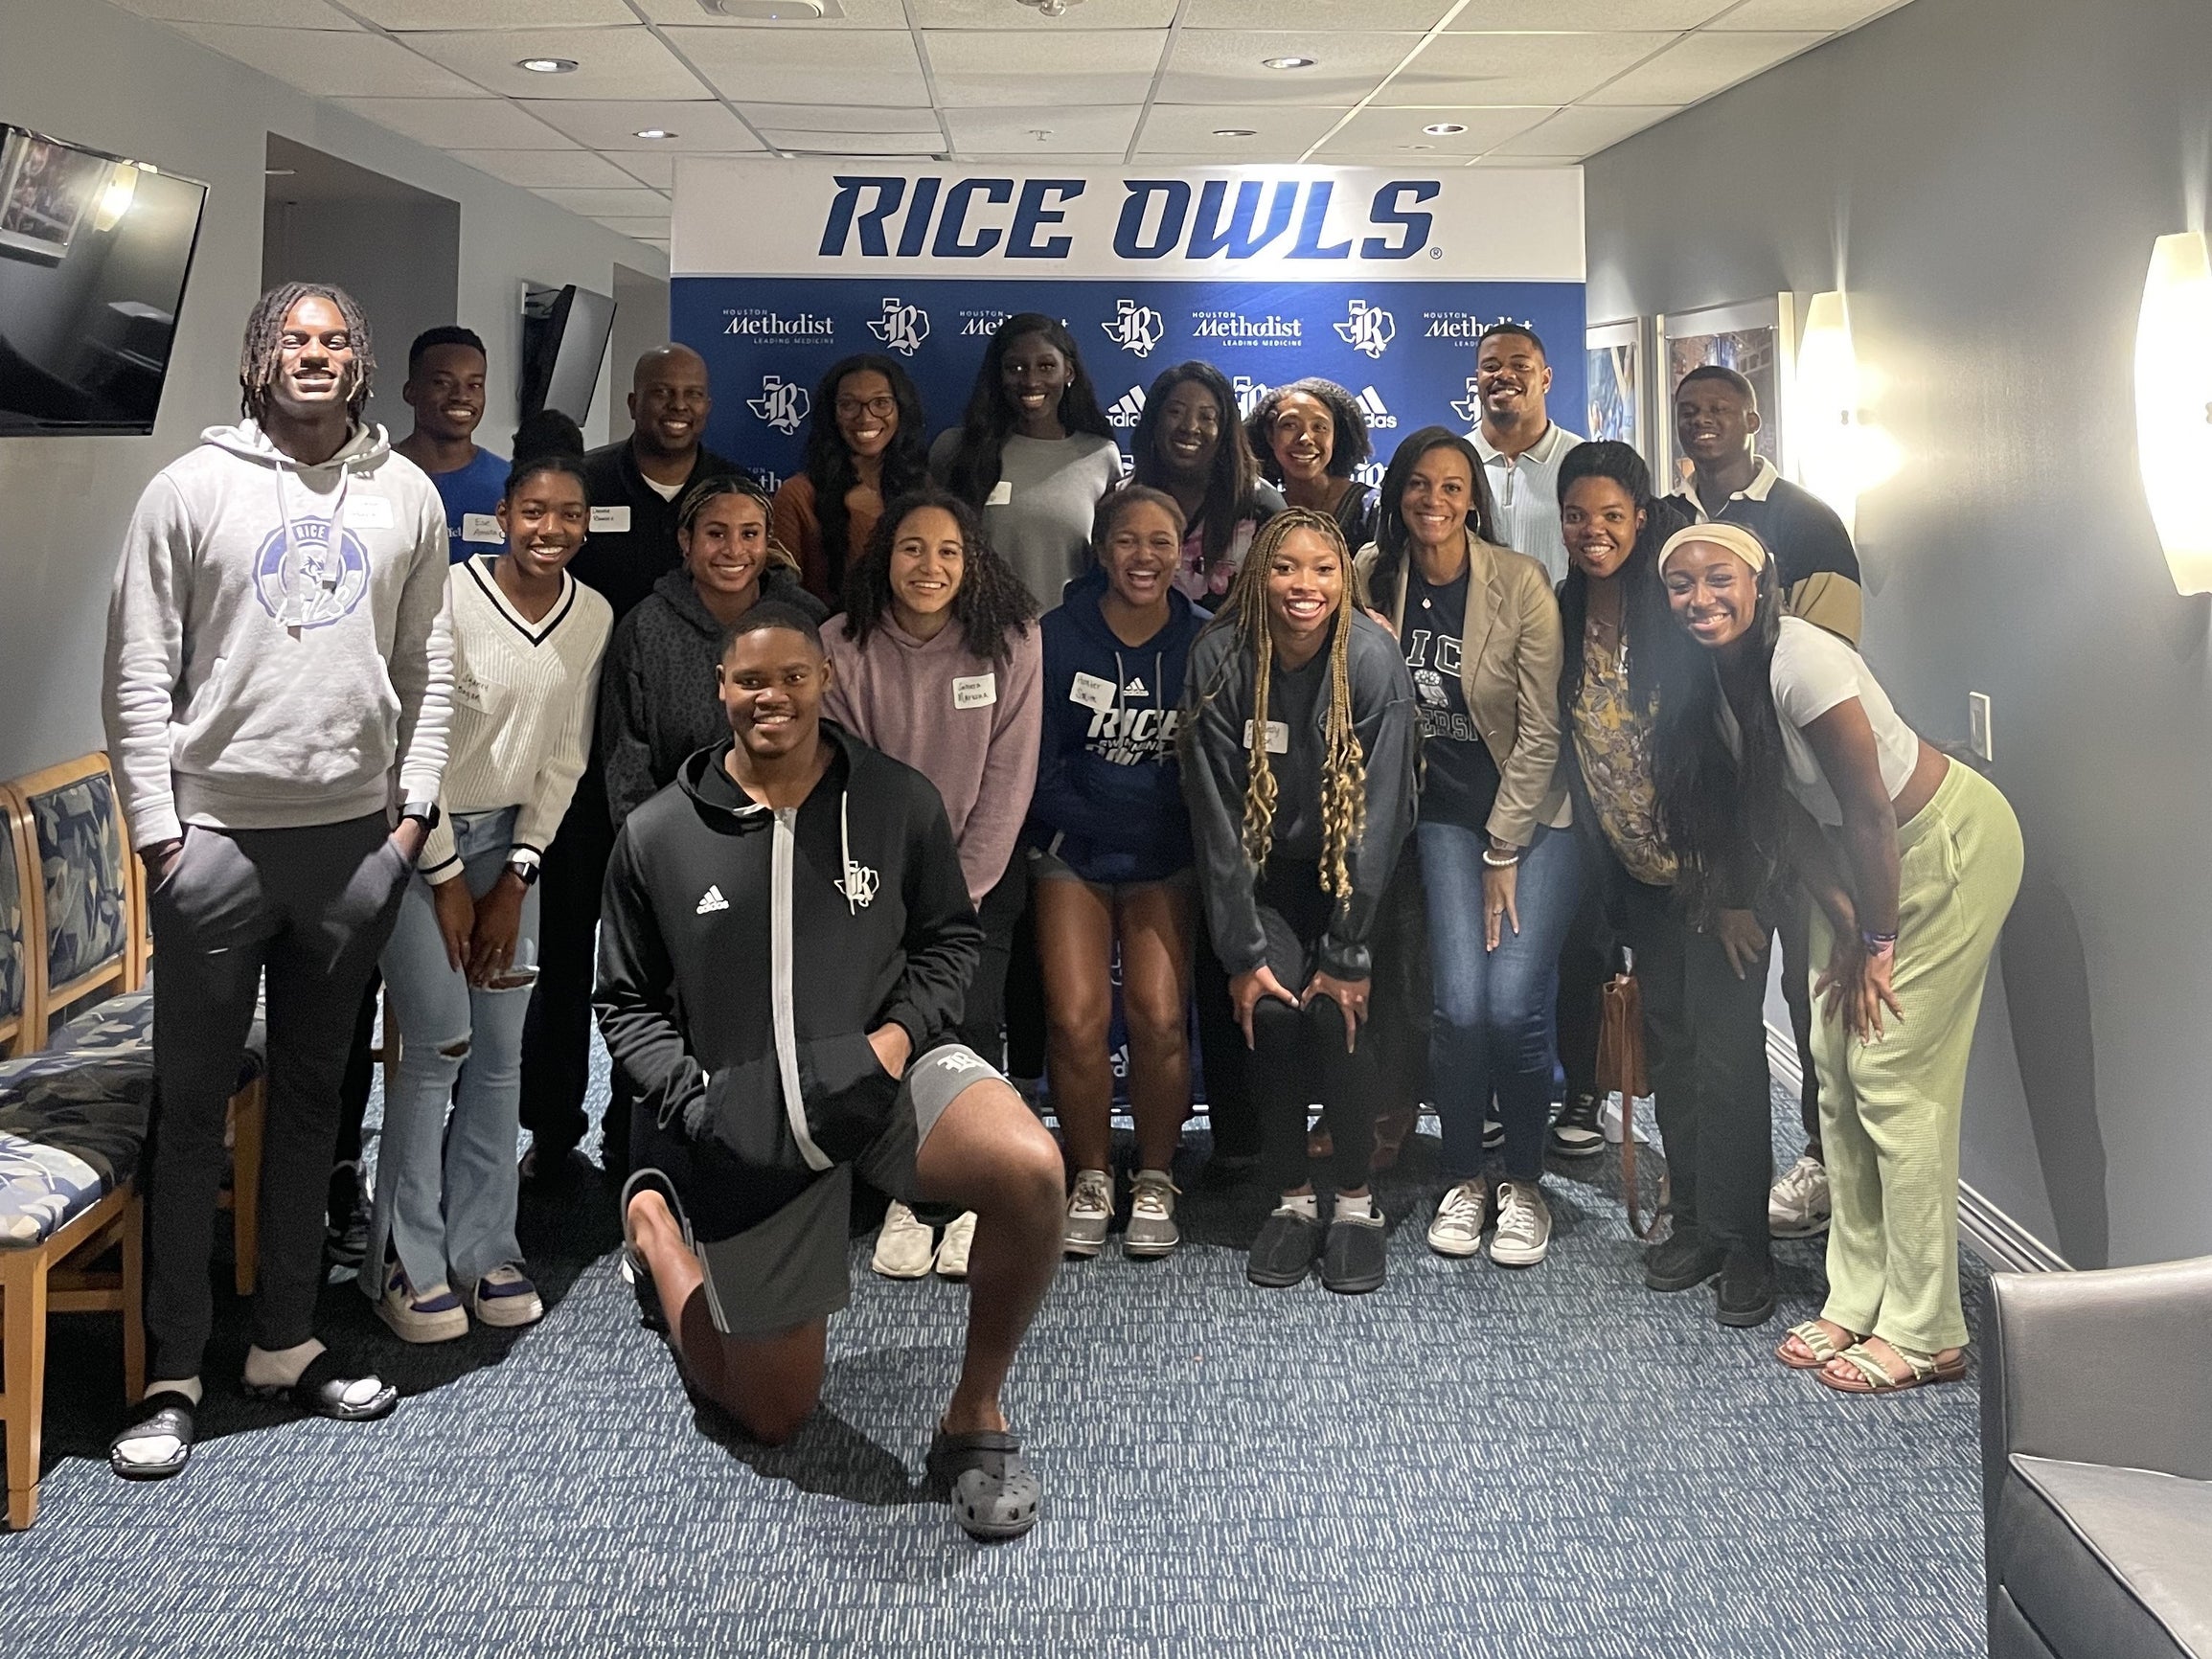 Group of students posing for photo in front of Rice Owls banner